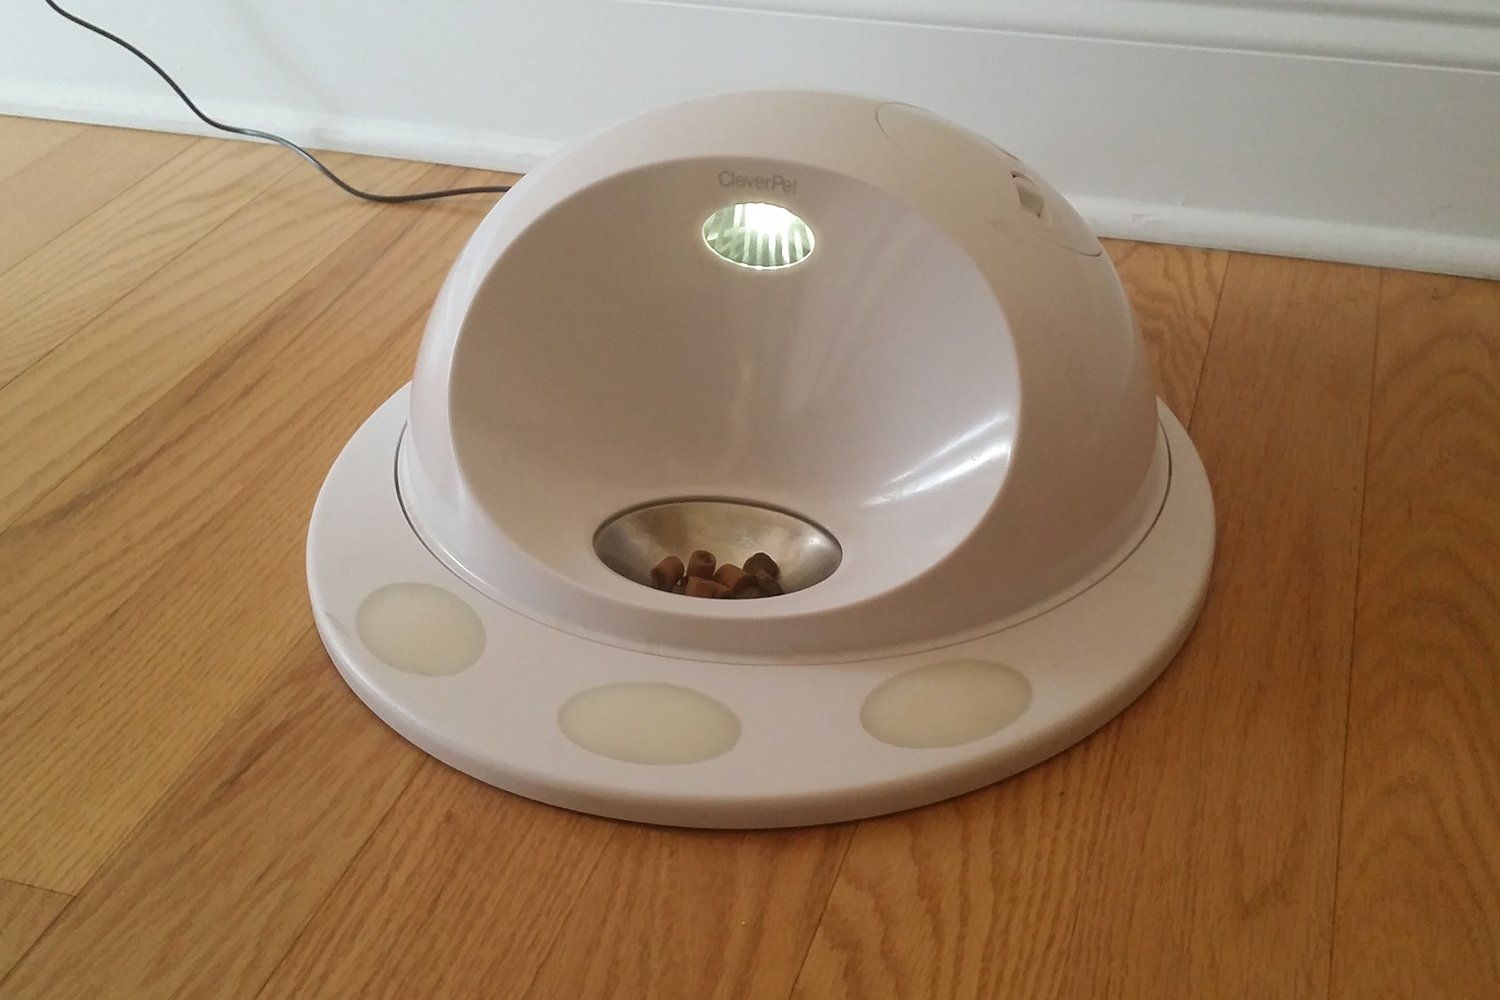 cleverpet hub first impressions review feeder 2